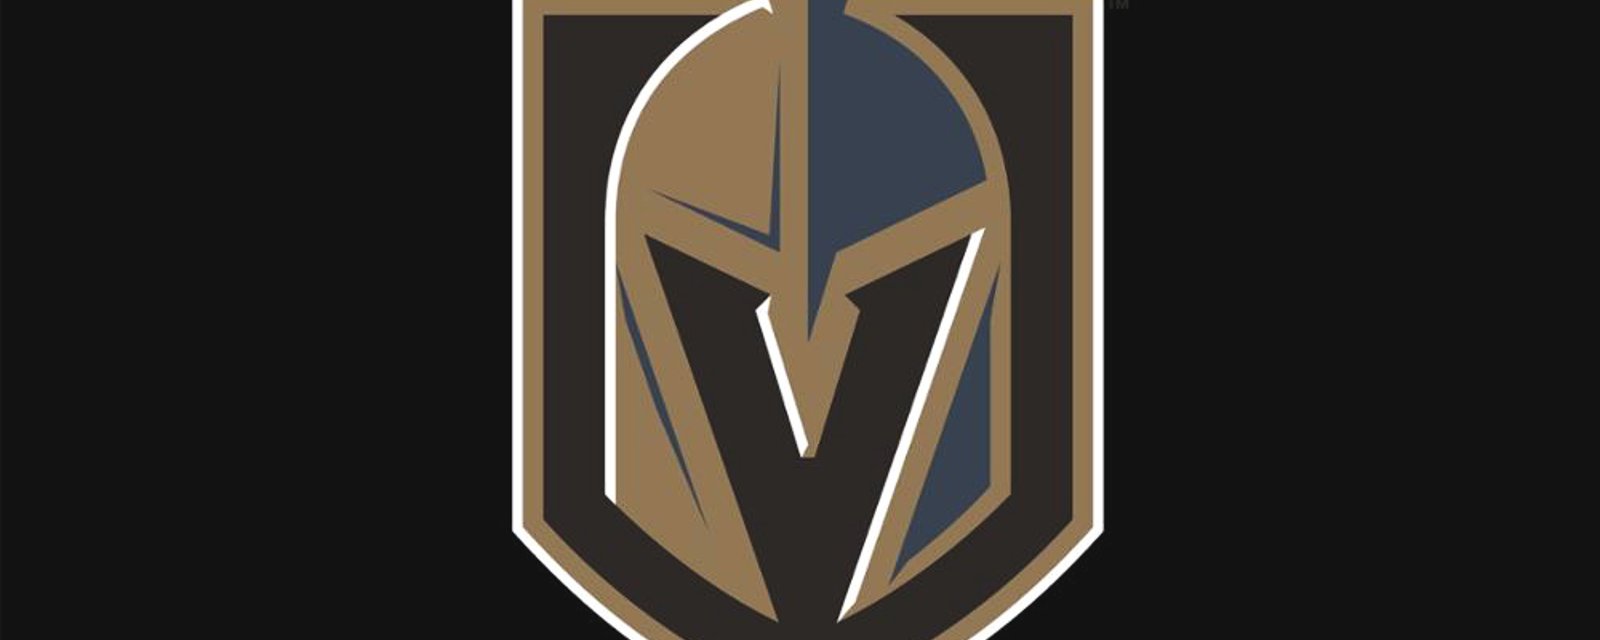 Breaking: Golden Knights have announced their first star player.